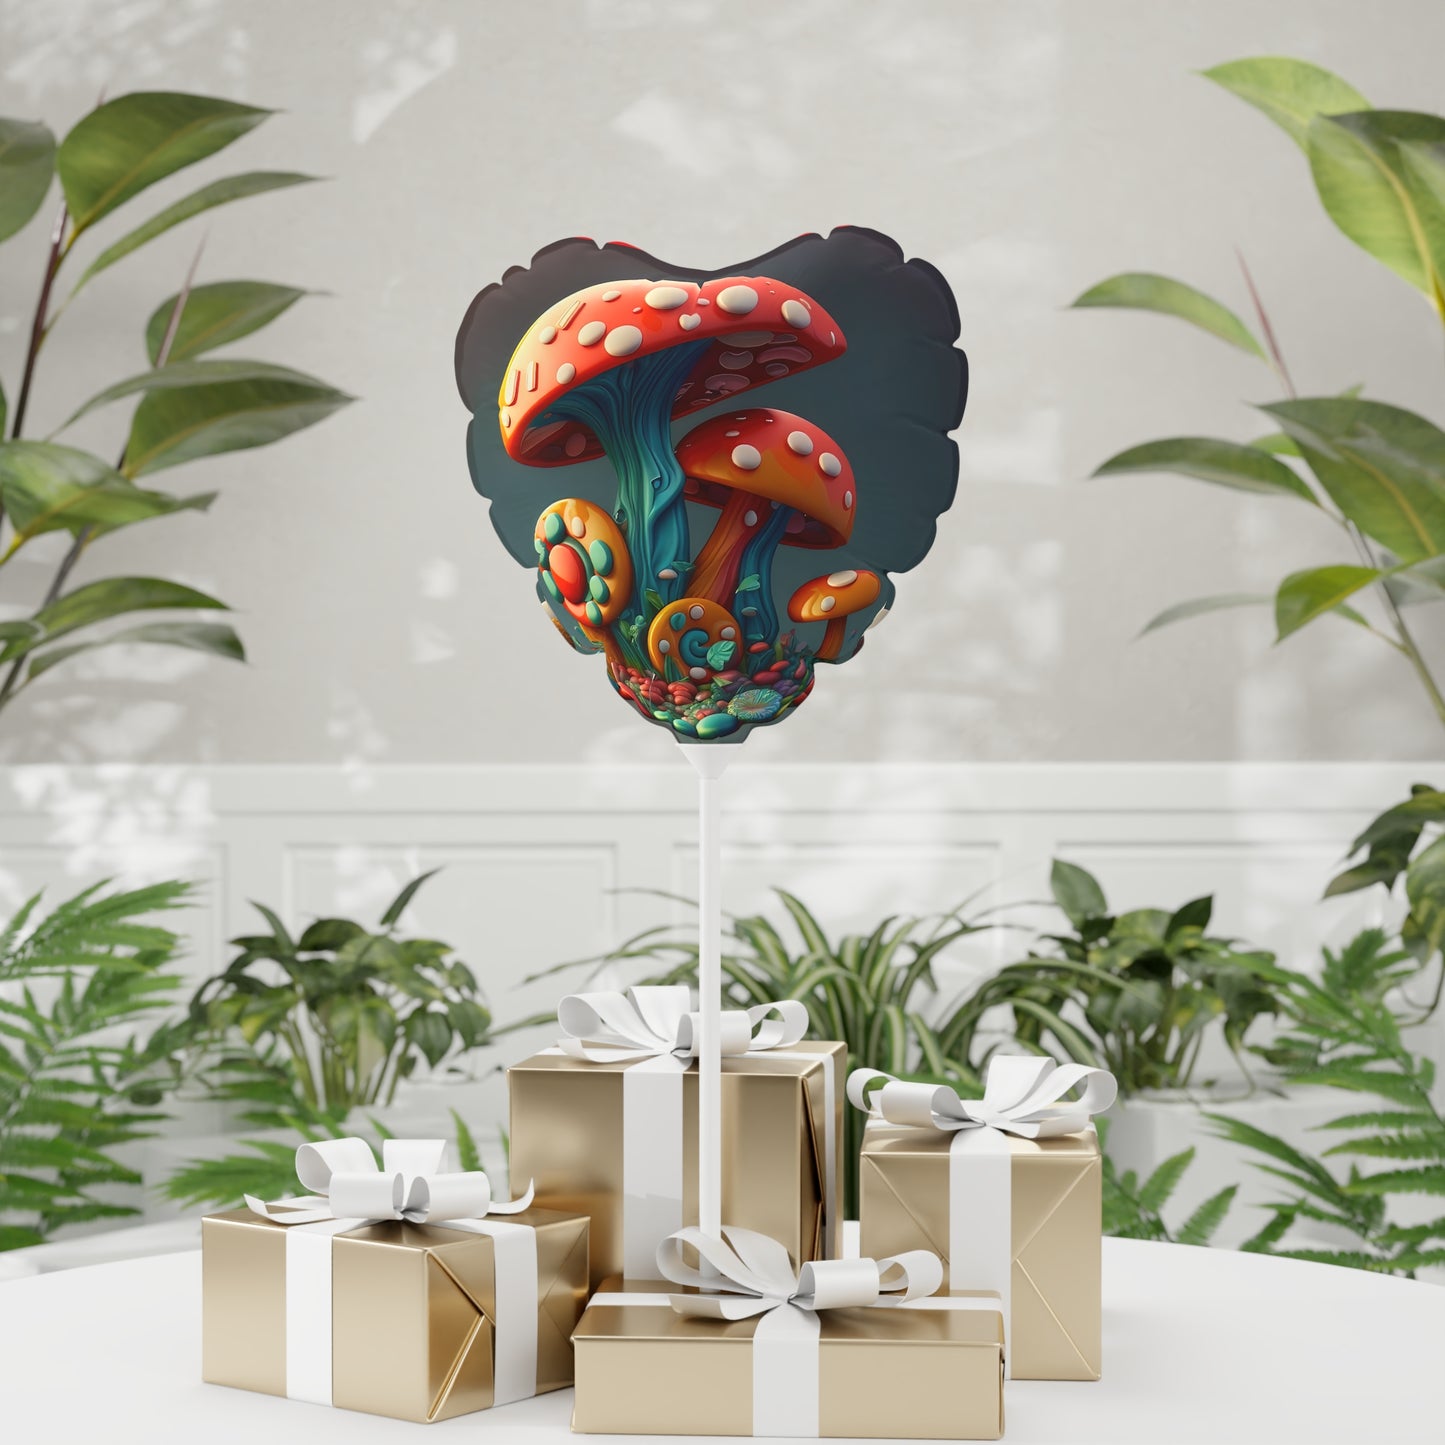 Hippie Mushroom Color Candy Style Design Style 4 Balloon (Round and Heart-shaped), 11"